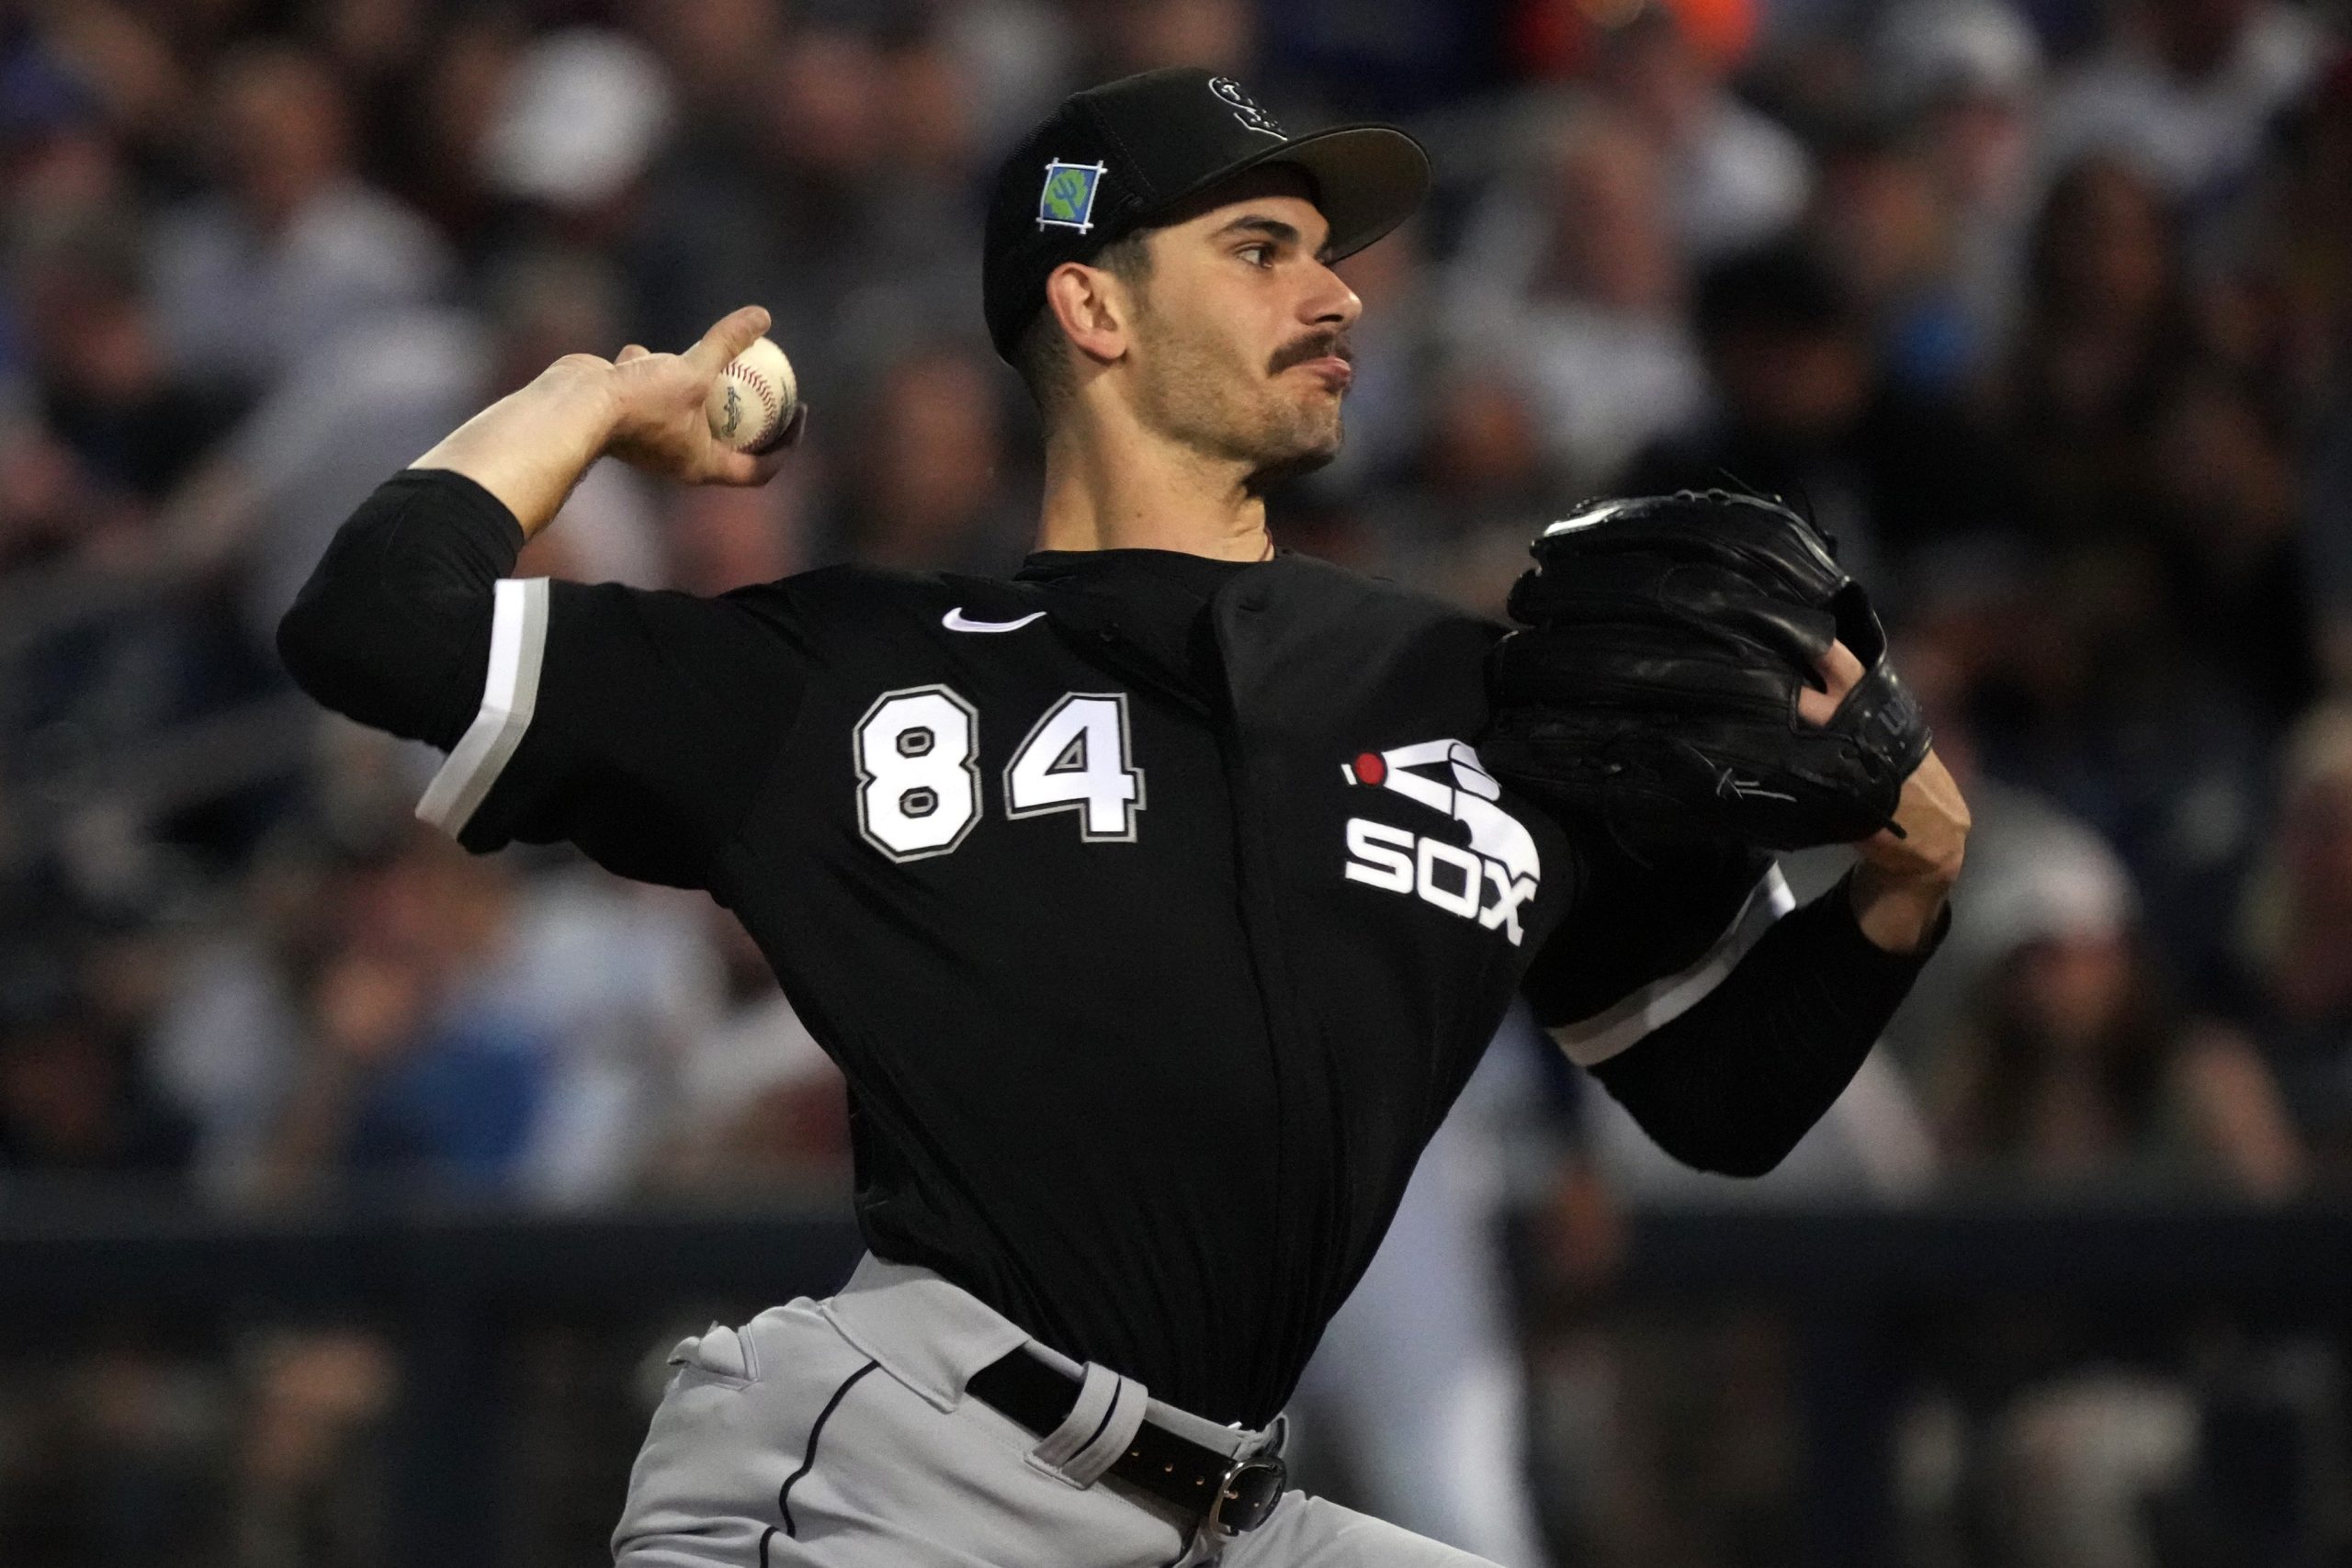 MLB Thursday mega parlay (+1067 odds) 8/11: Stick with Dylan Cease